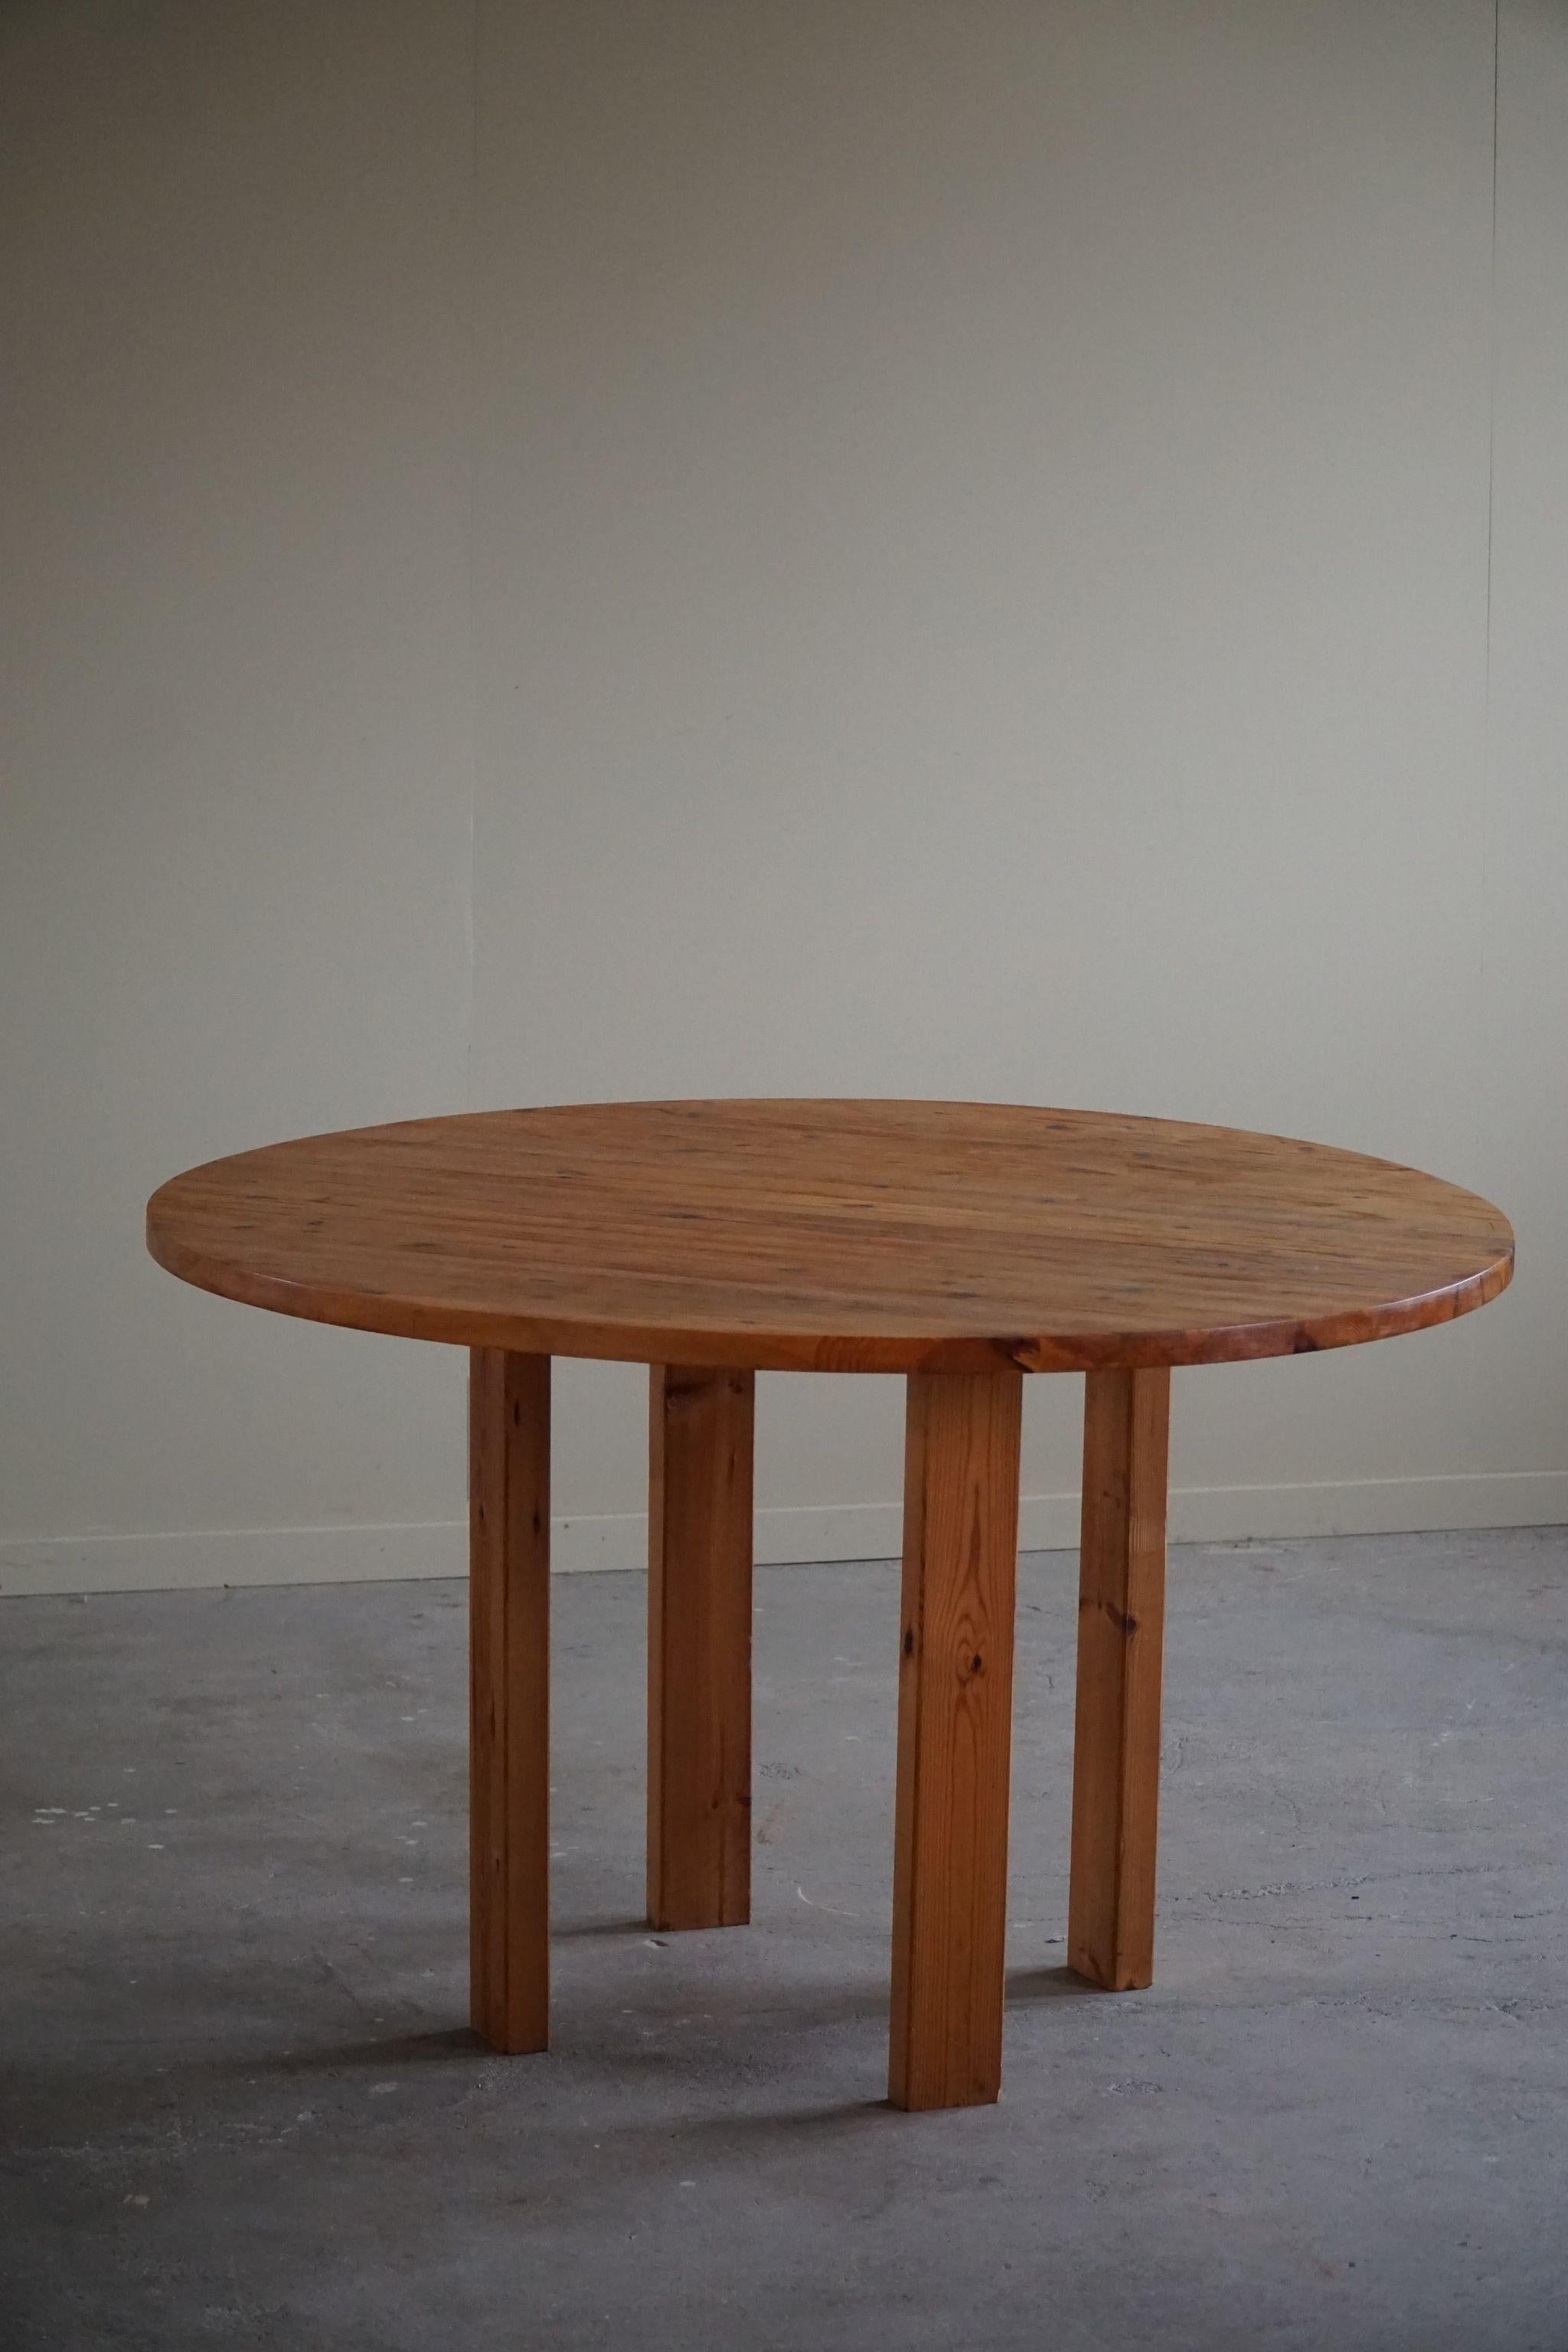 Danish Mid Century Modern, Round Dining Table in Solid Pine, Made in the 1970s For Sale 7